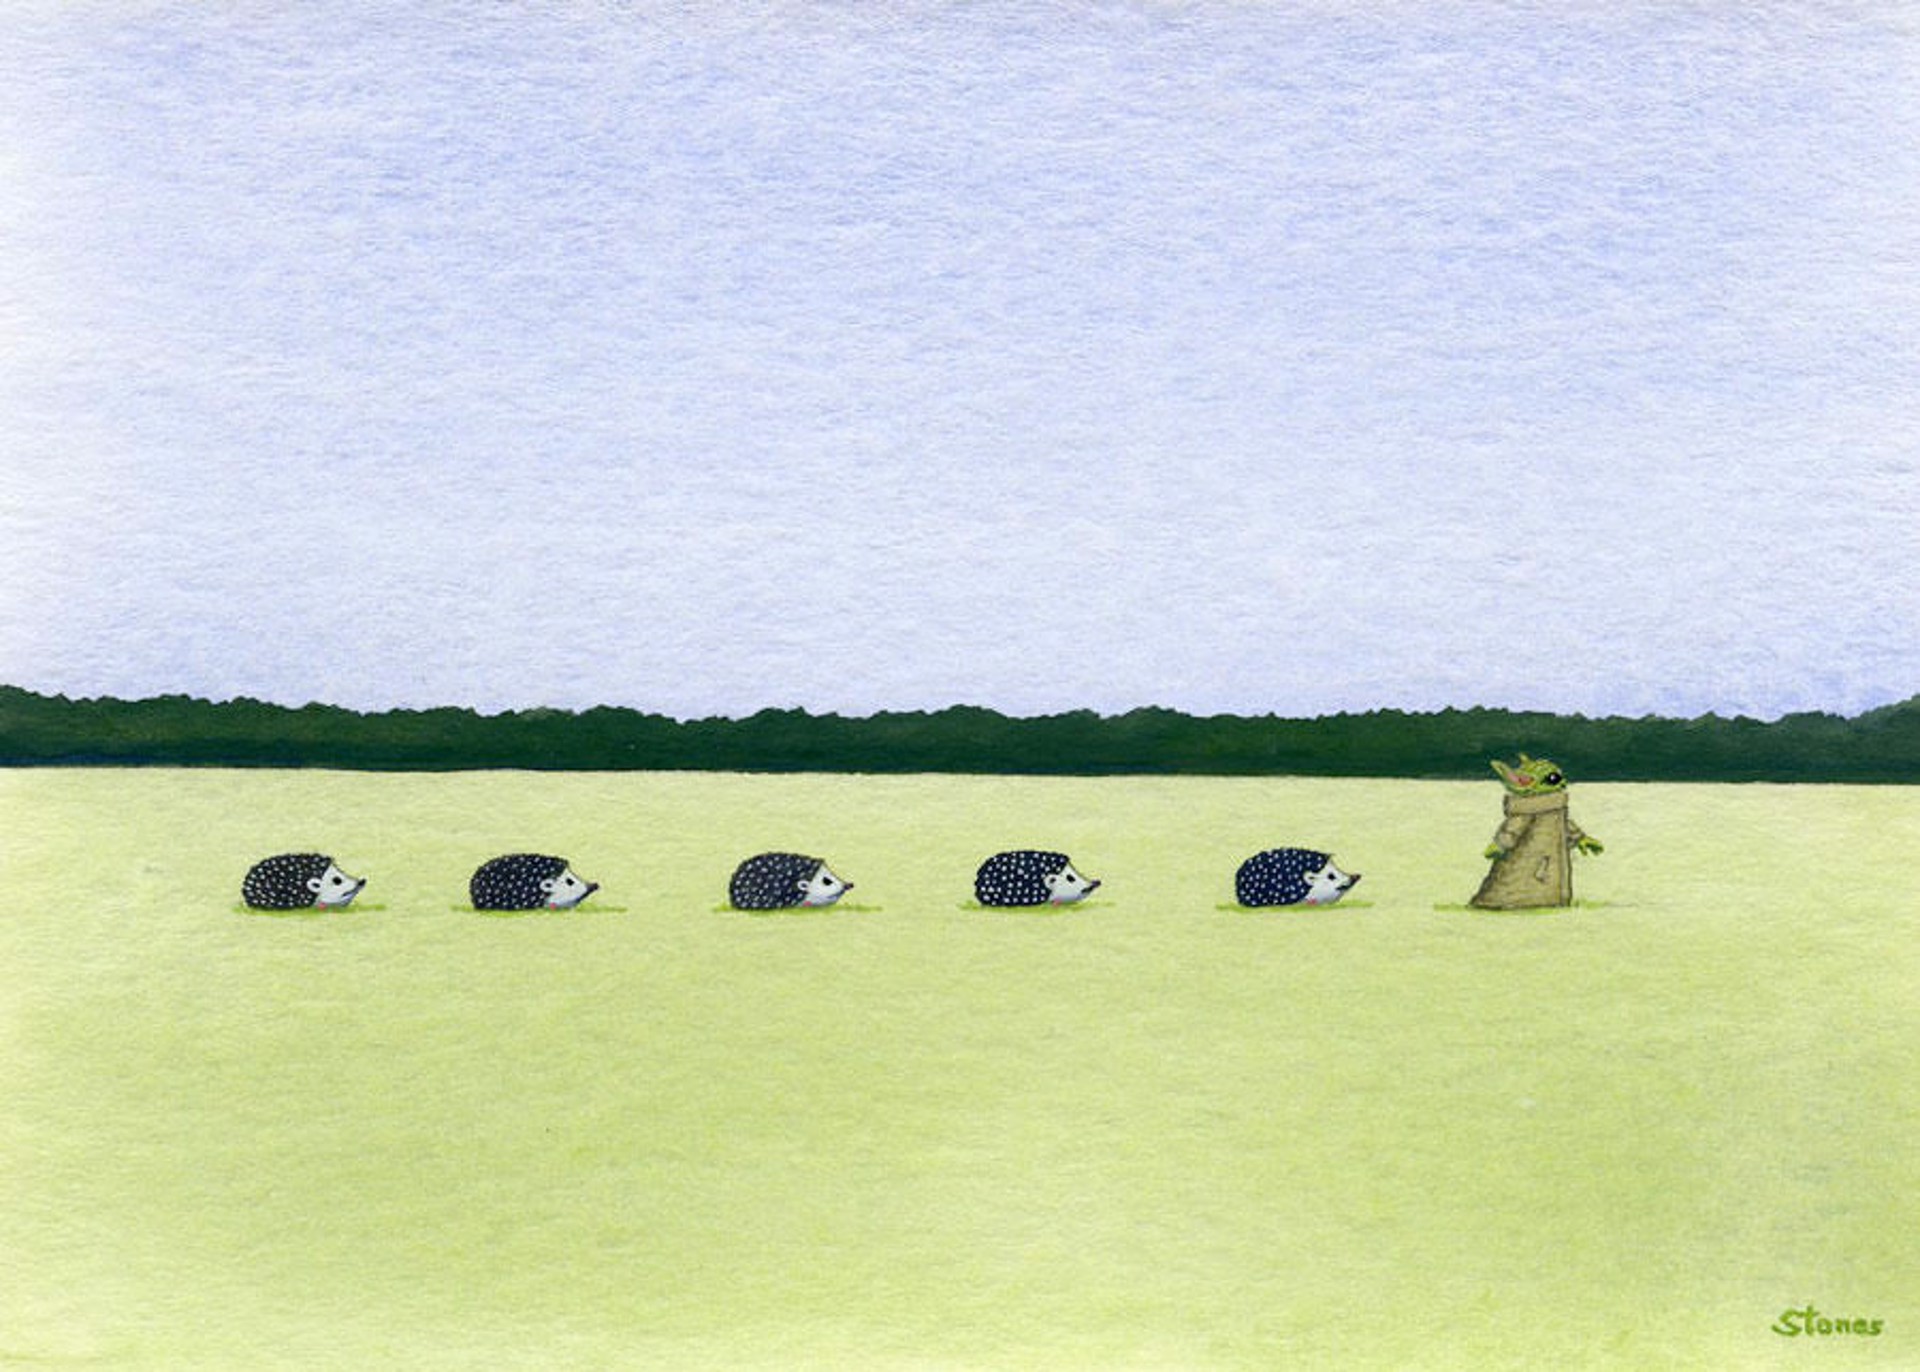 Hedgehogs Follow Child by Greg Stones